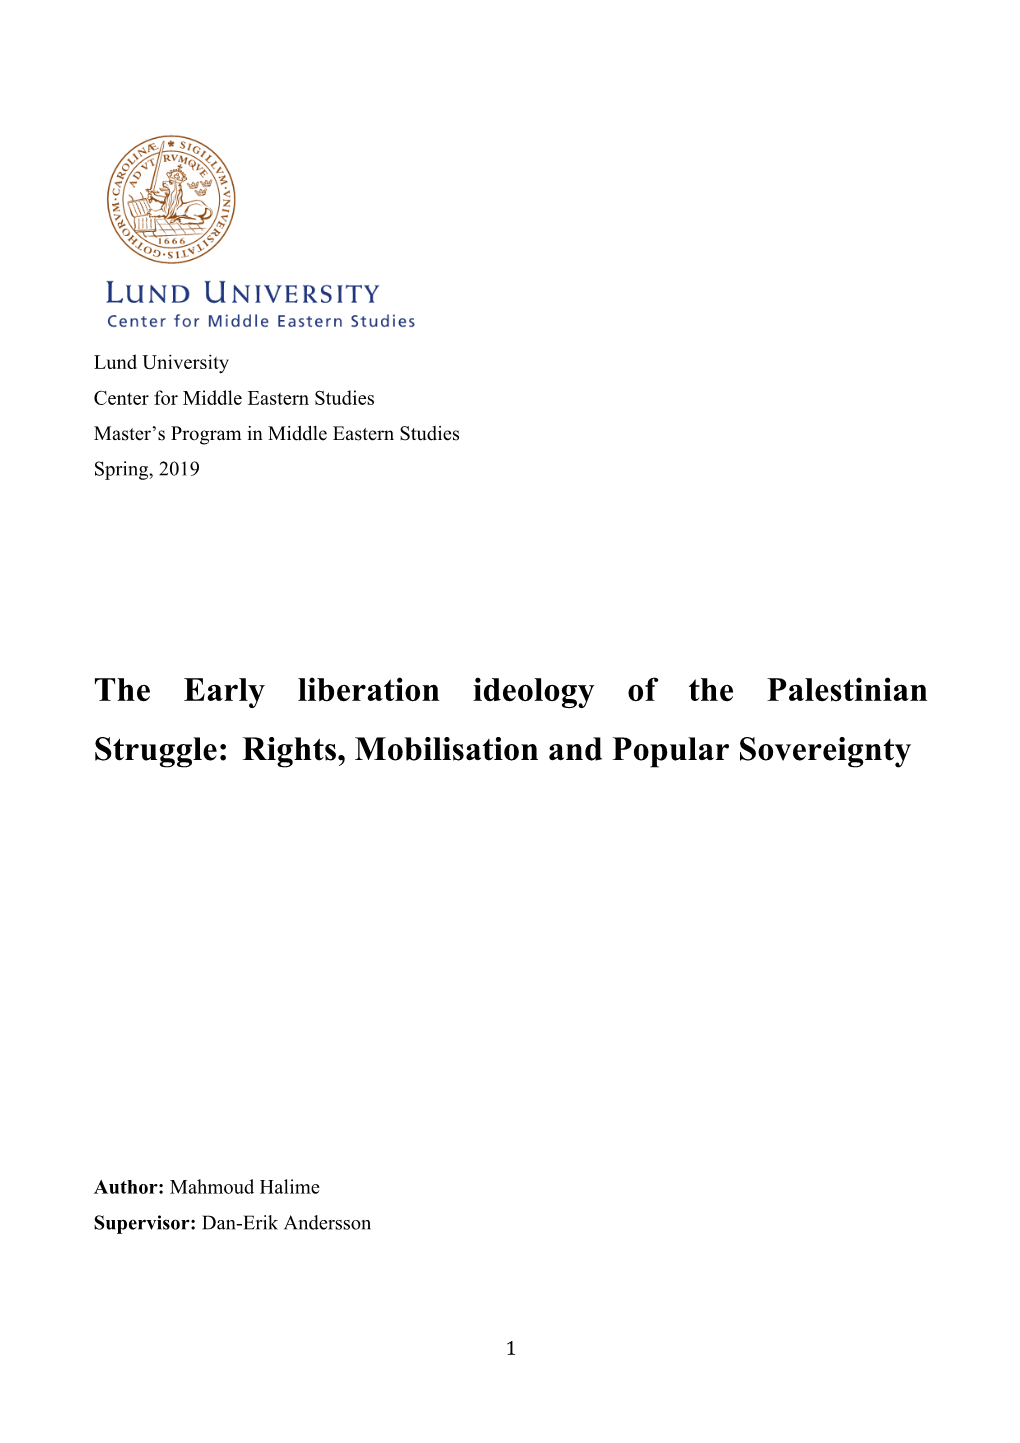 The Early Liberation Ideology of the Palestinian